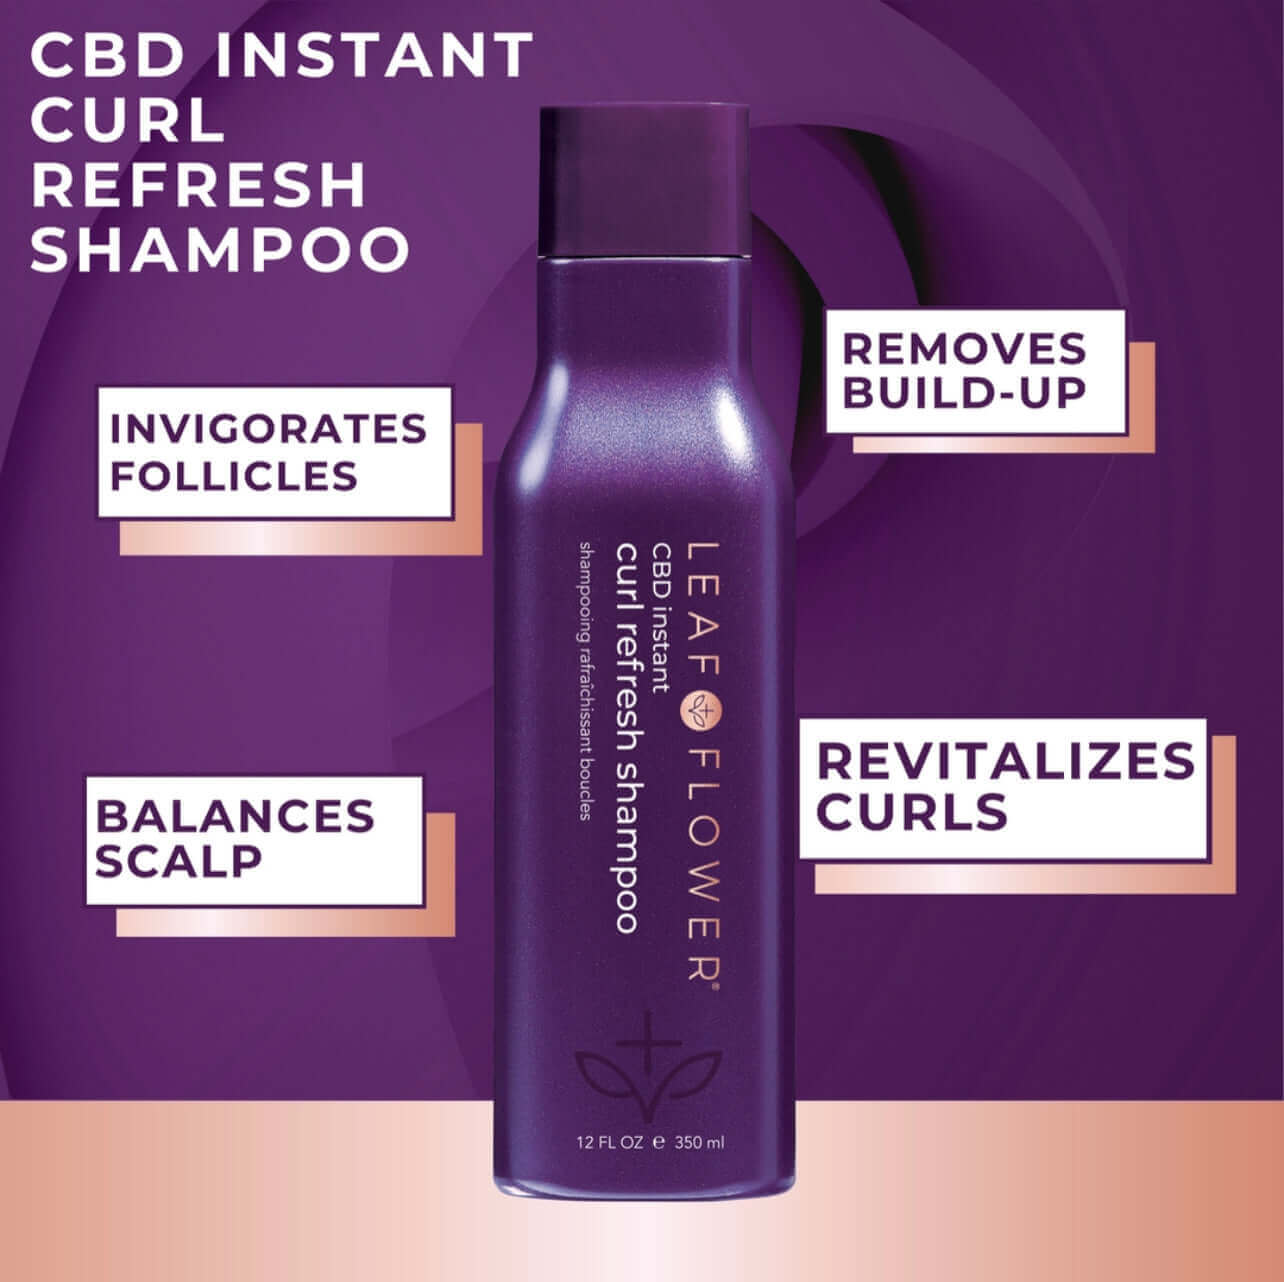 A bottle of Leaf and Flower Instant Curl Refresh Shampoo with text highlighting benefits: invigorates follicles, balances scalp, gently removes build-up, and revitalizes color-safe, hydrated curls.